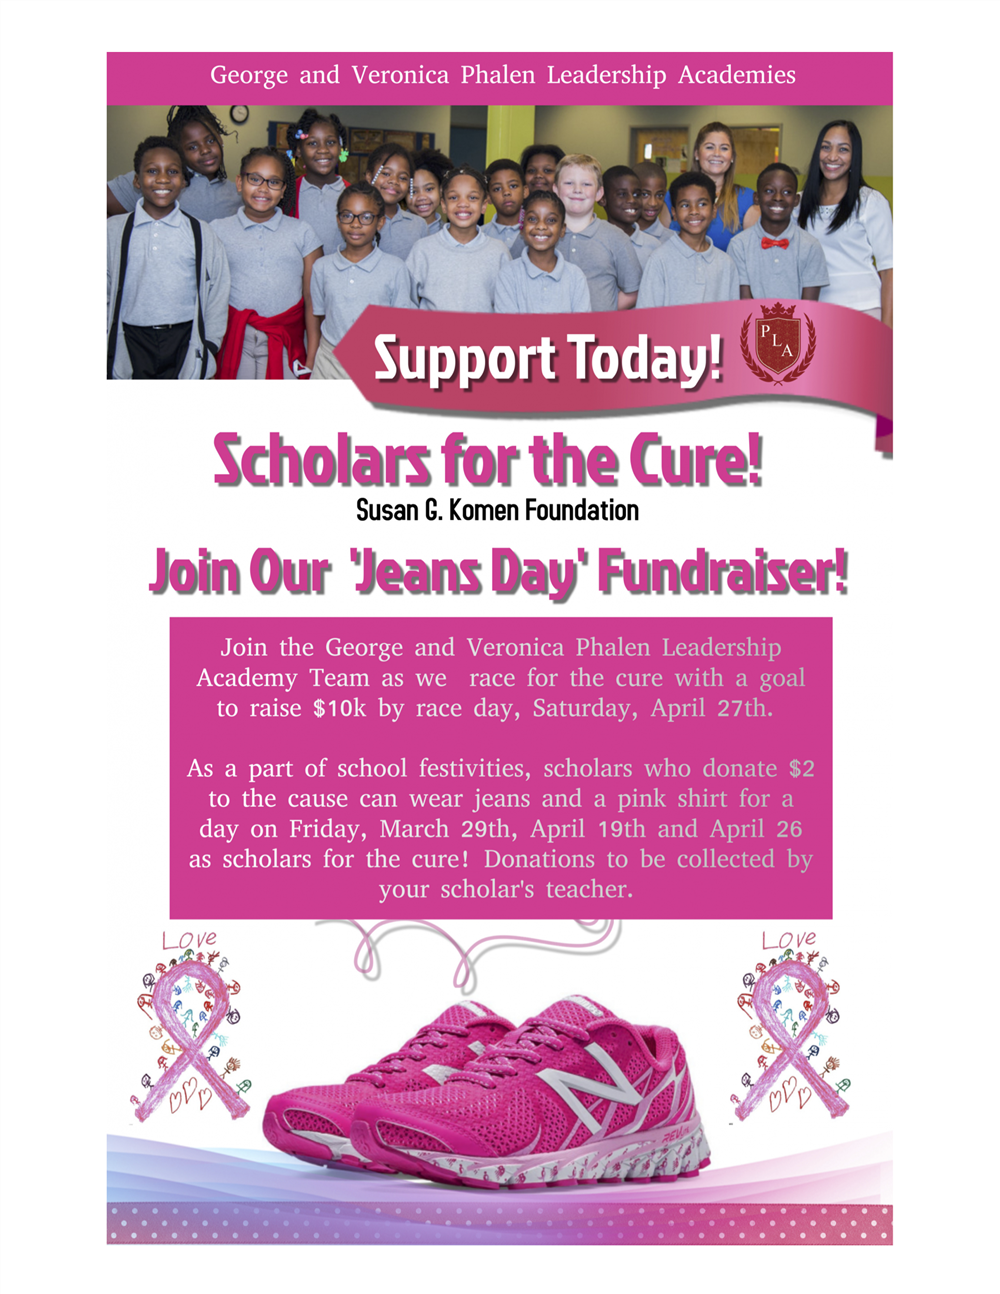 Scholars for the Cure! Join our Jeans Day Fundraiser. Scholars donate $2 to wear jeans and a pink shirt for the day.  